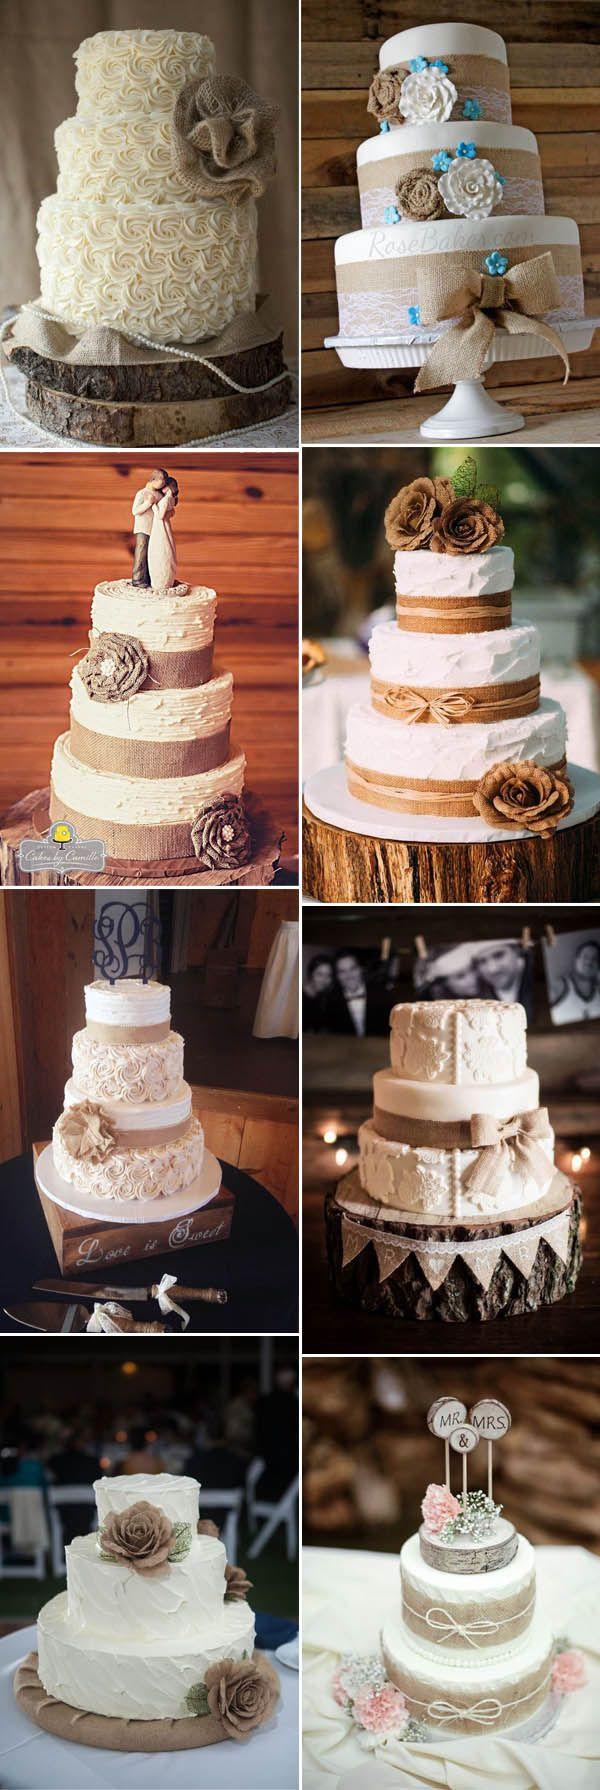 Wedding - The Most Complete Burlap Rustic Wedding Ideas For Your Inspiration